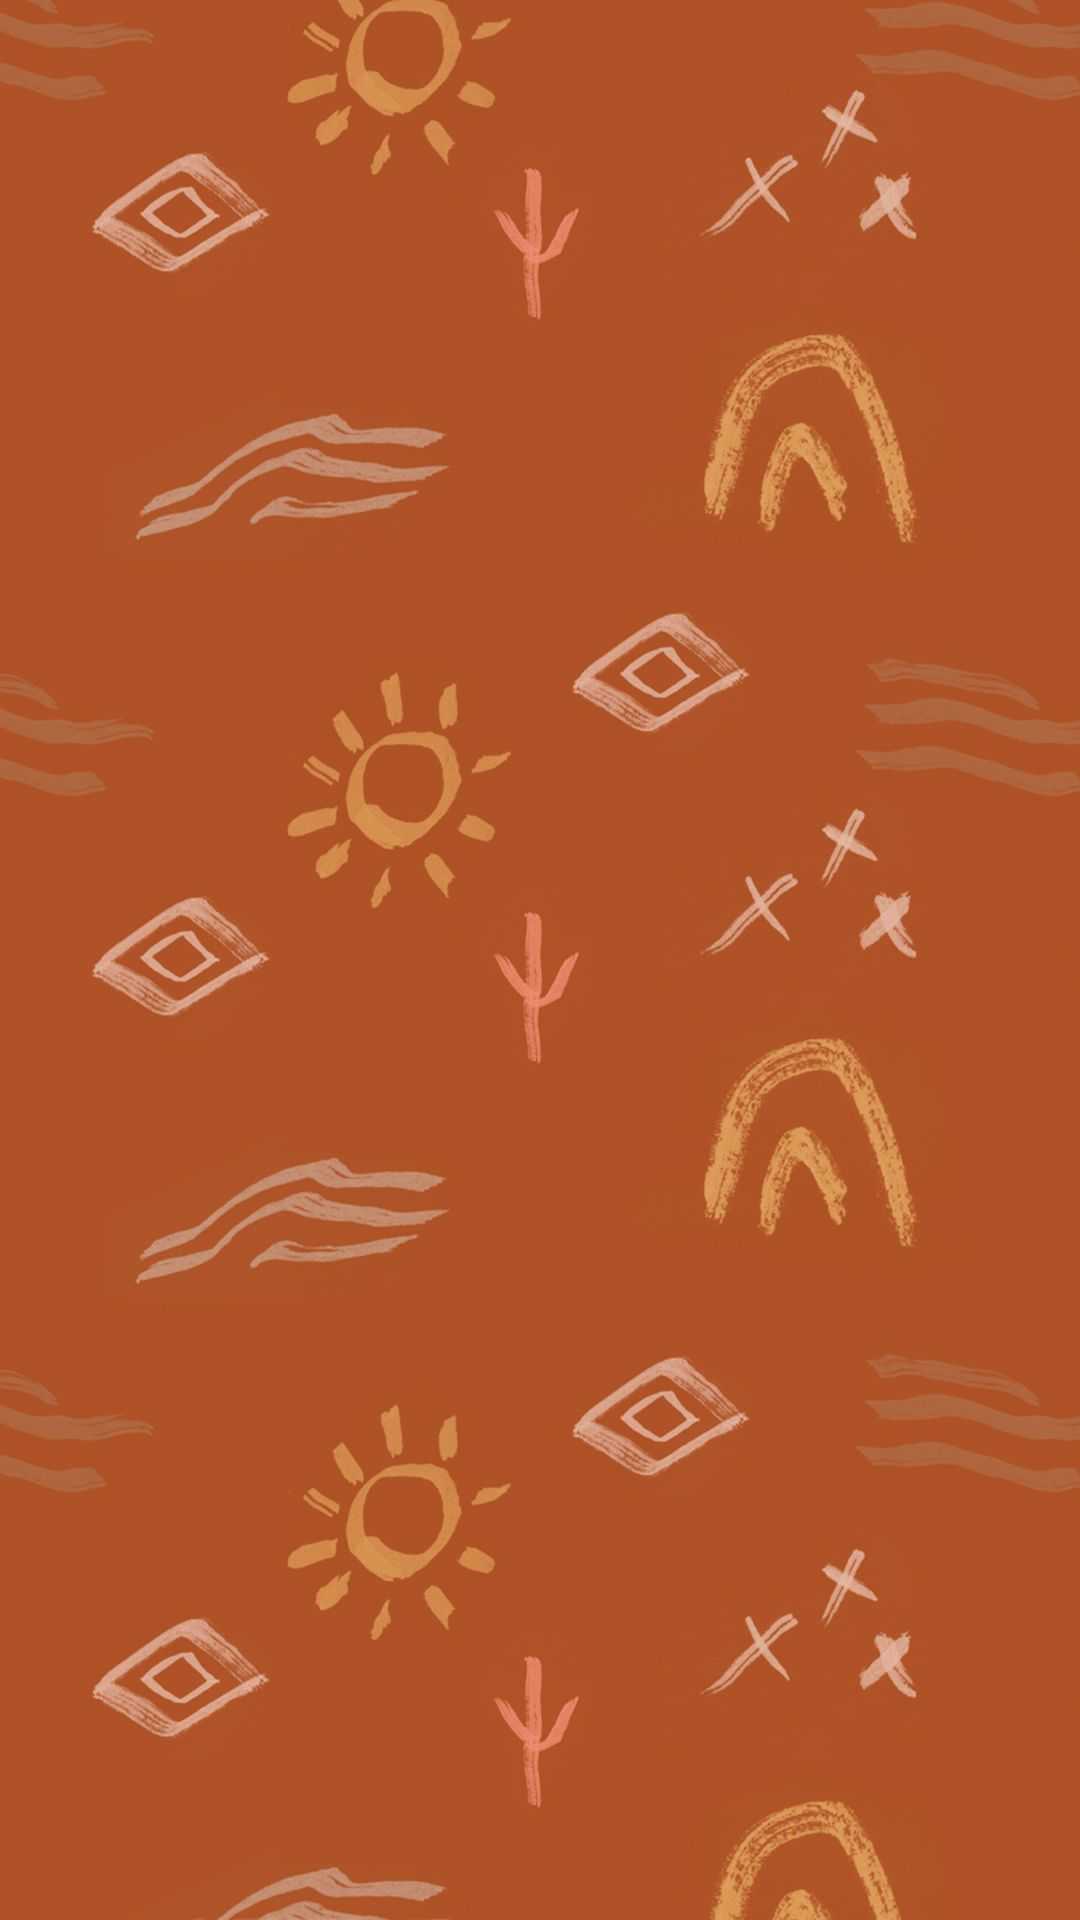 A pattern of suns and other shapes on an orange background - Boho